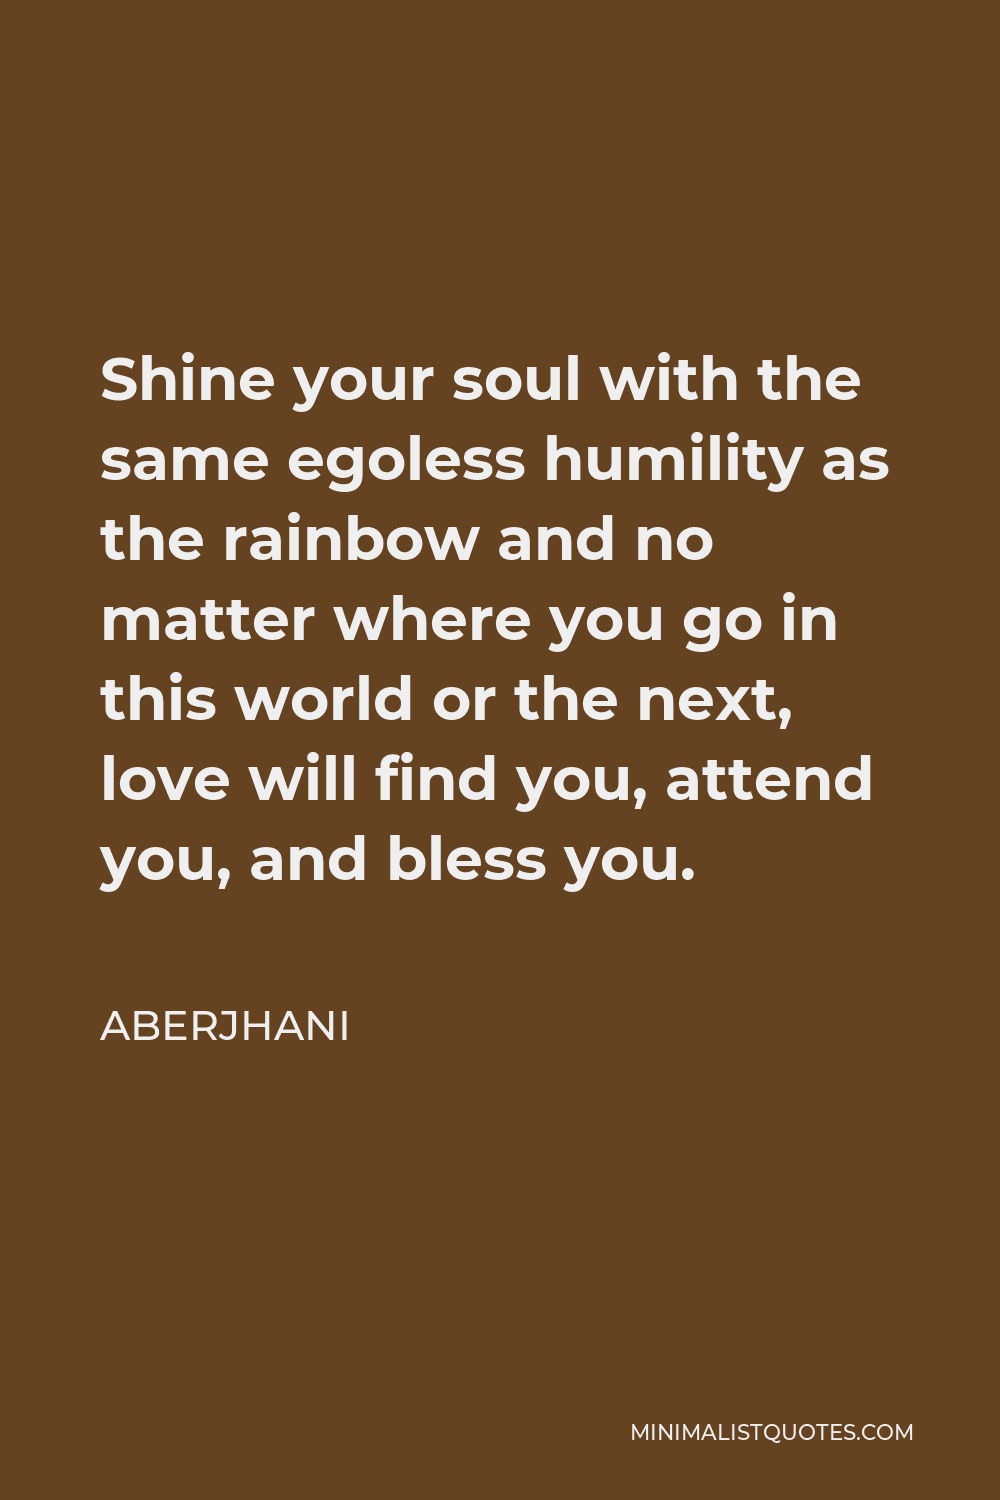 Aberjhani Quote - Shine your soul with the same egoless humility as the rainbow and no matter where you go in this world or the next, love will find you, attend you, and bless you.